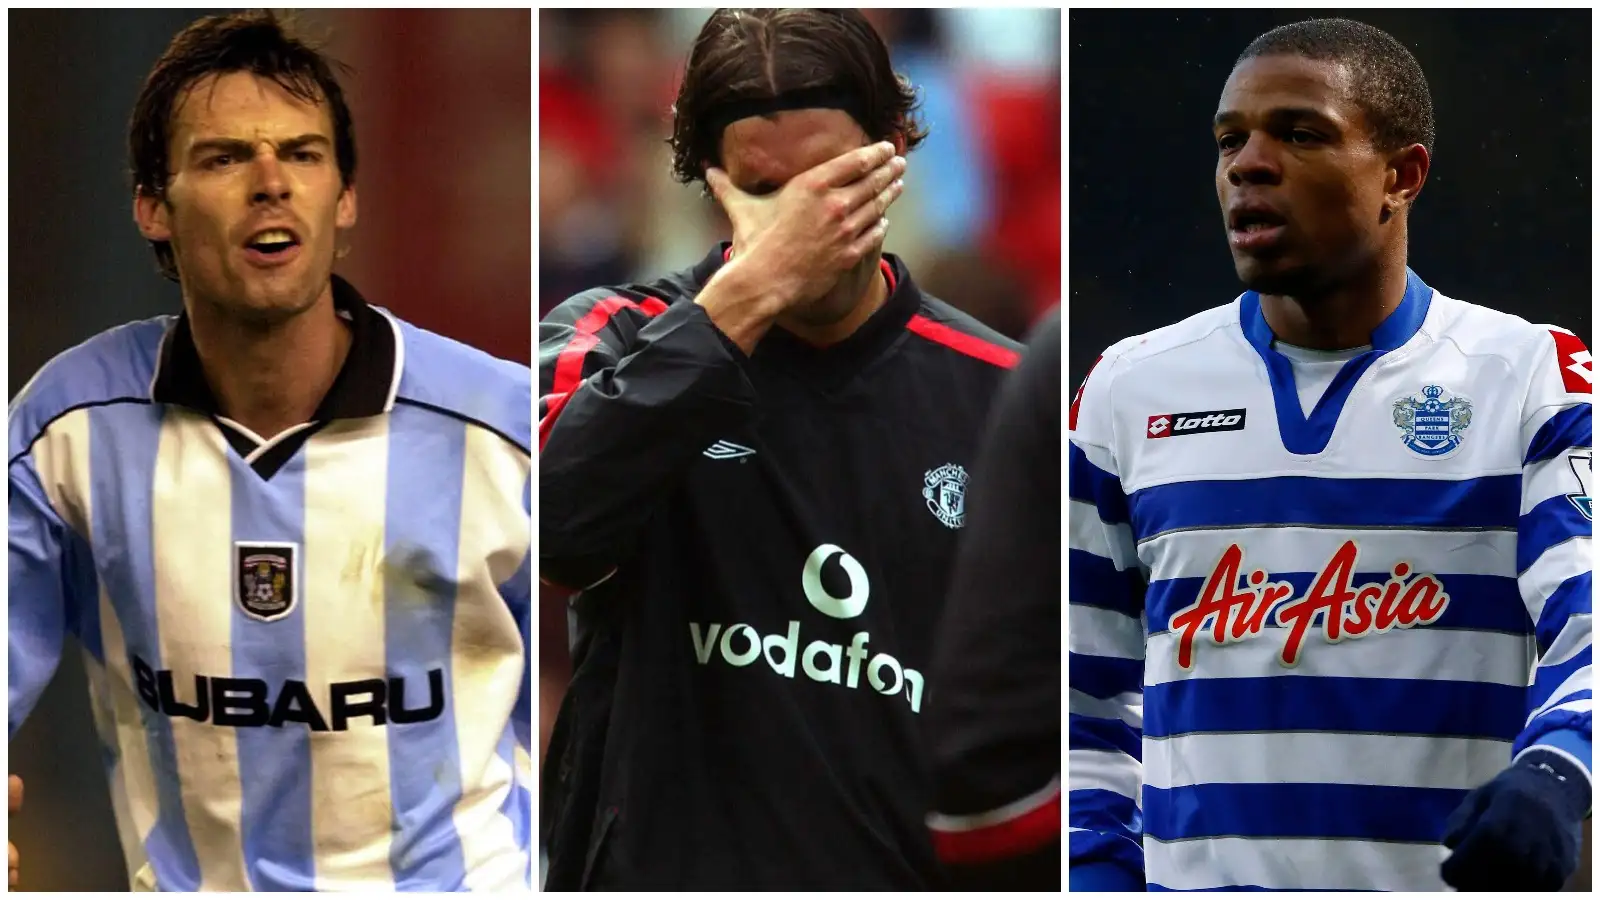 Gary Breen, Ruud van Nistelrooy and Loic Remy all failed medicals before big moves.